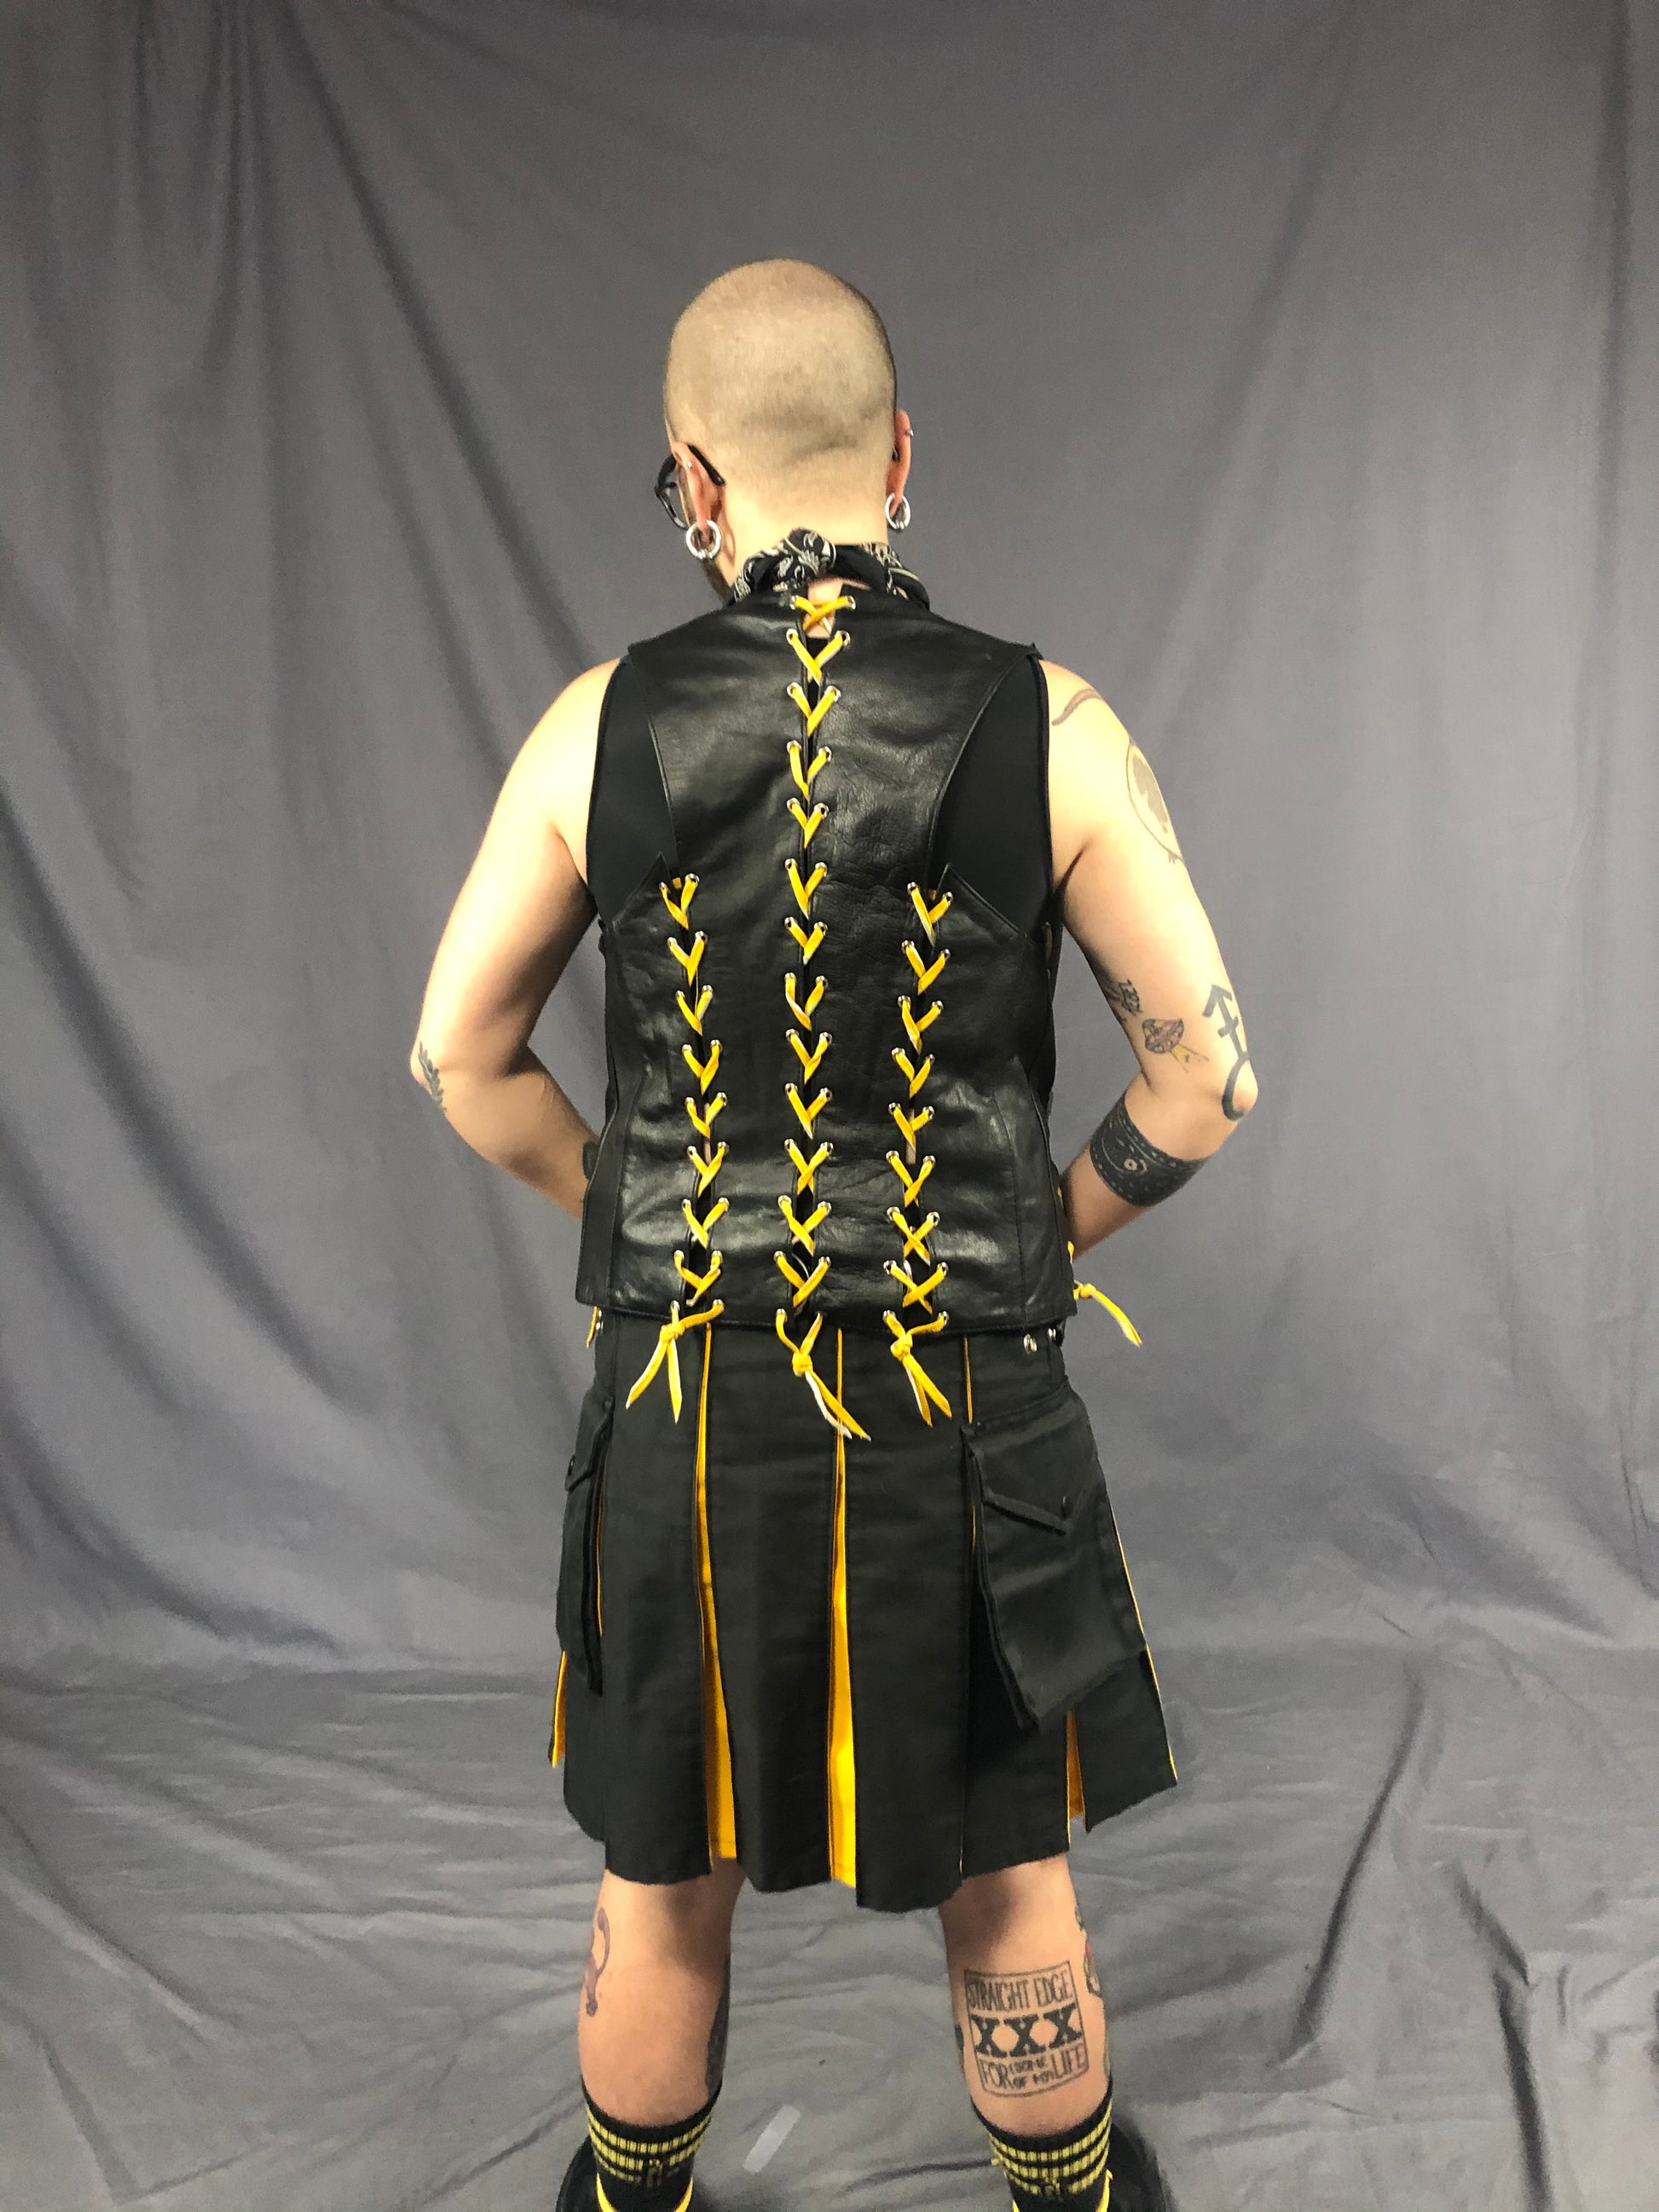 Back view of front & back lace cowhide bar vest with yellow laces, matched with a black kilt with yellow panels.